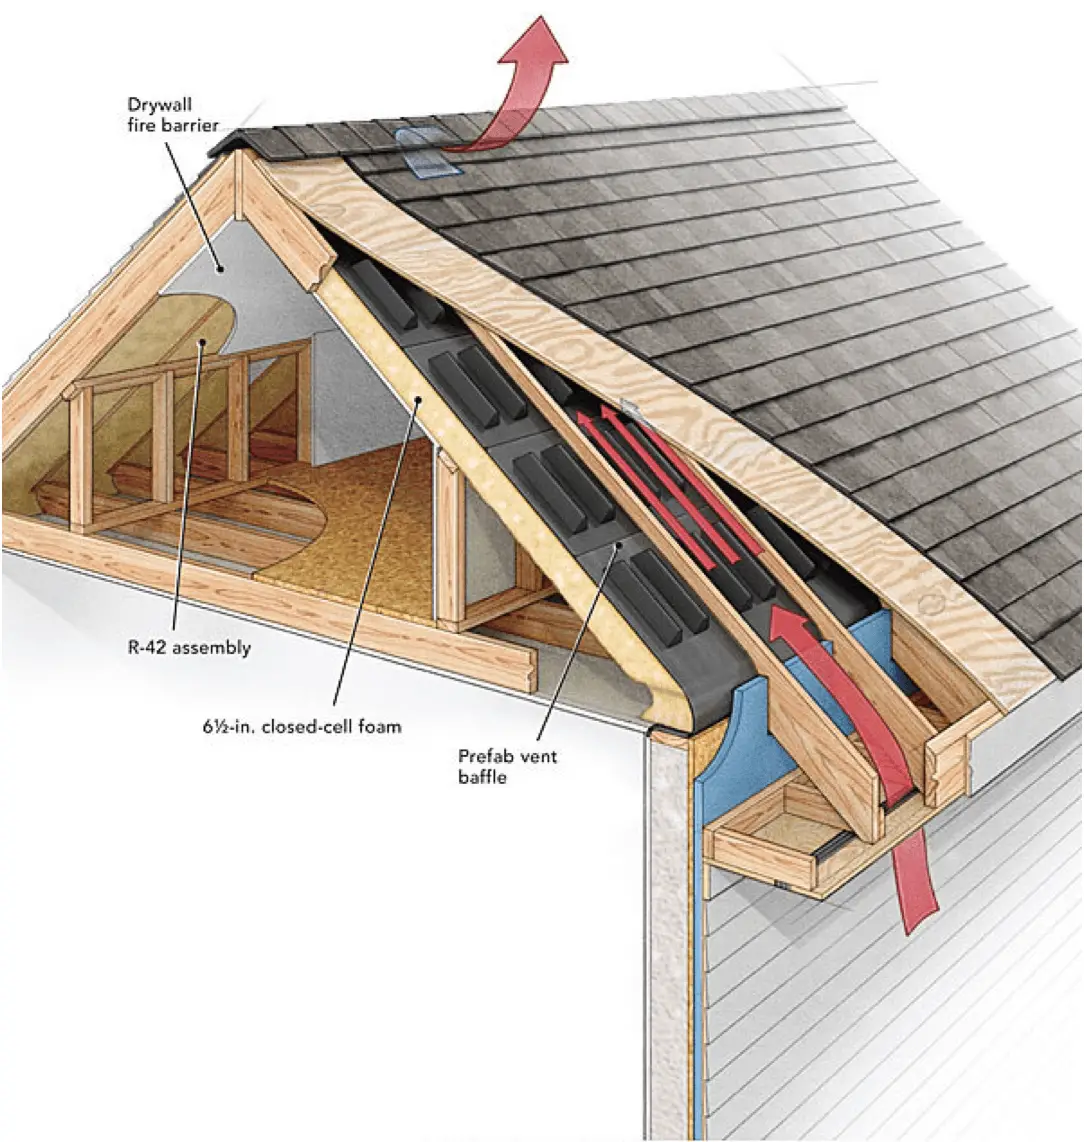 Roof vents: Three questions to ask before you install